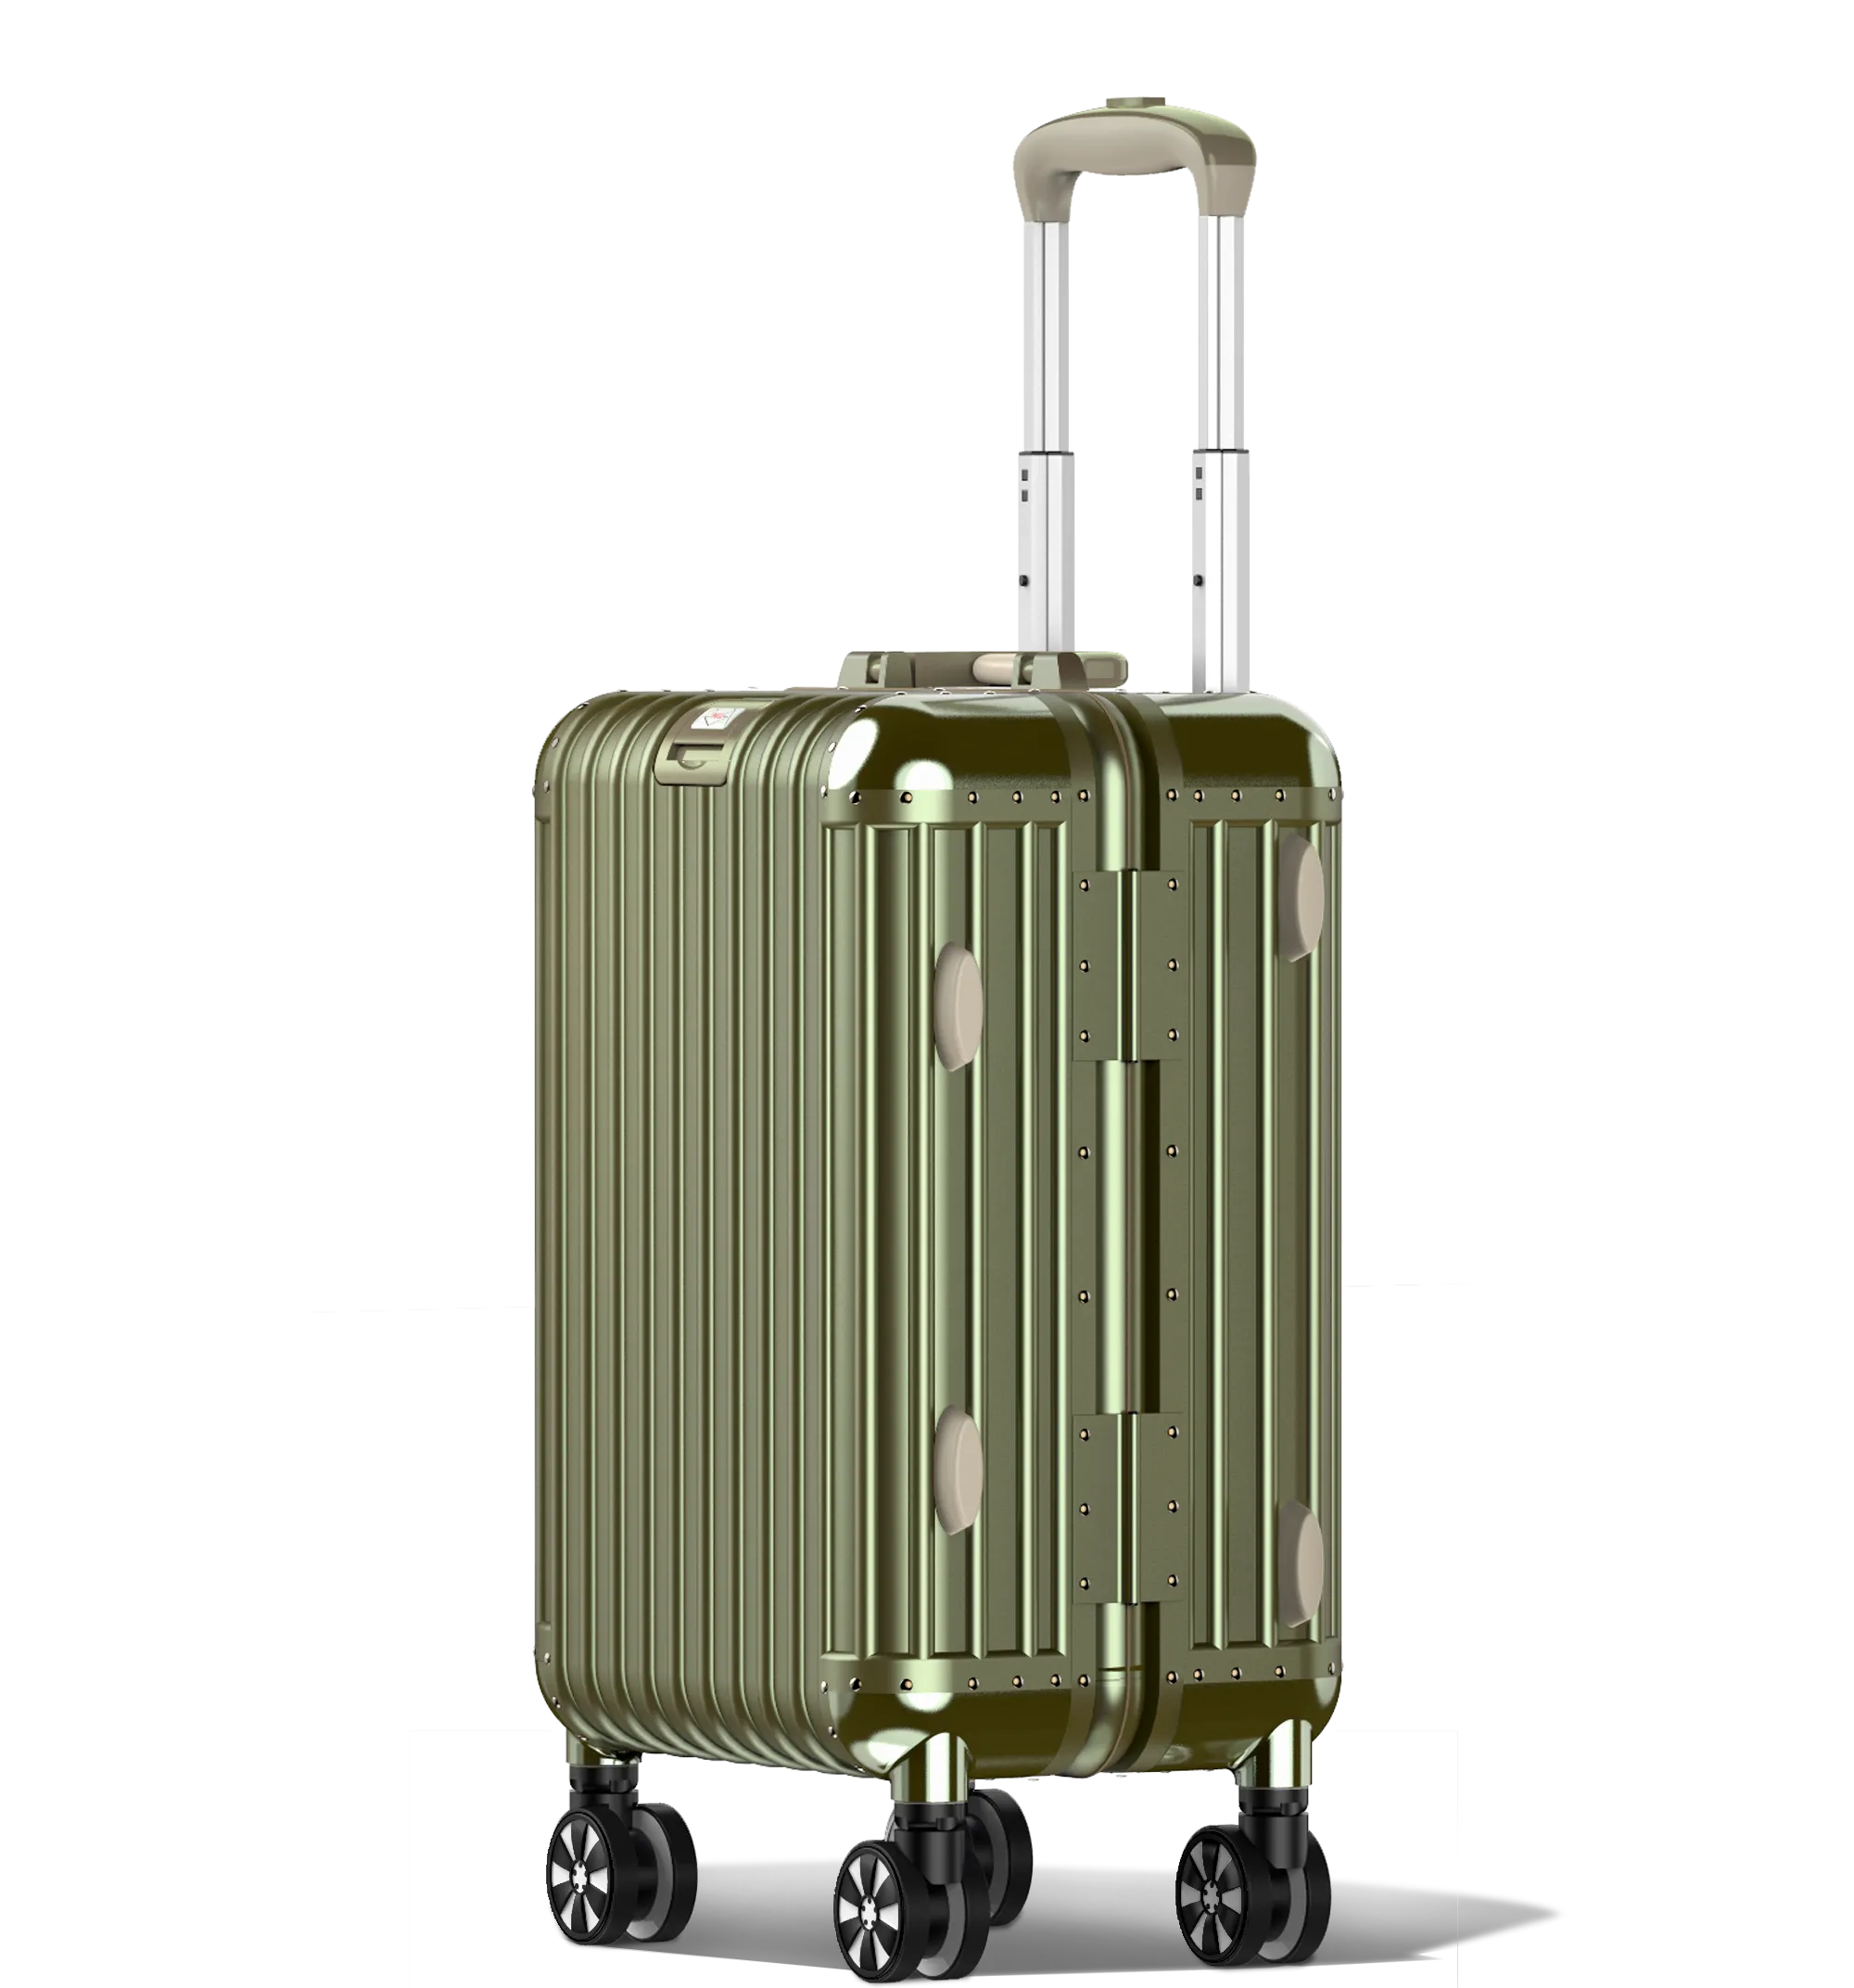 A vertical Champagne metallic Cabin in 54/23 hard-shell aluminium luggage with an extended telescopic handle, ribbed exterior, and a central latch with side locking mechanisms. It has four double-spinner wheels and is shown against a white background.